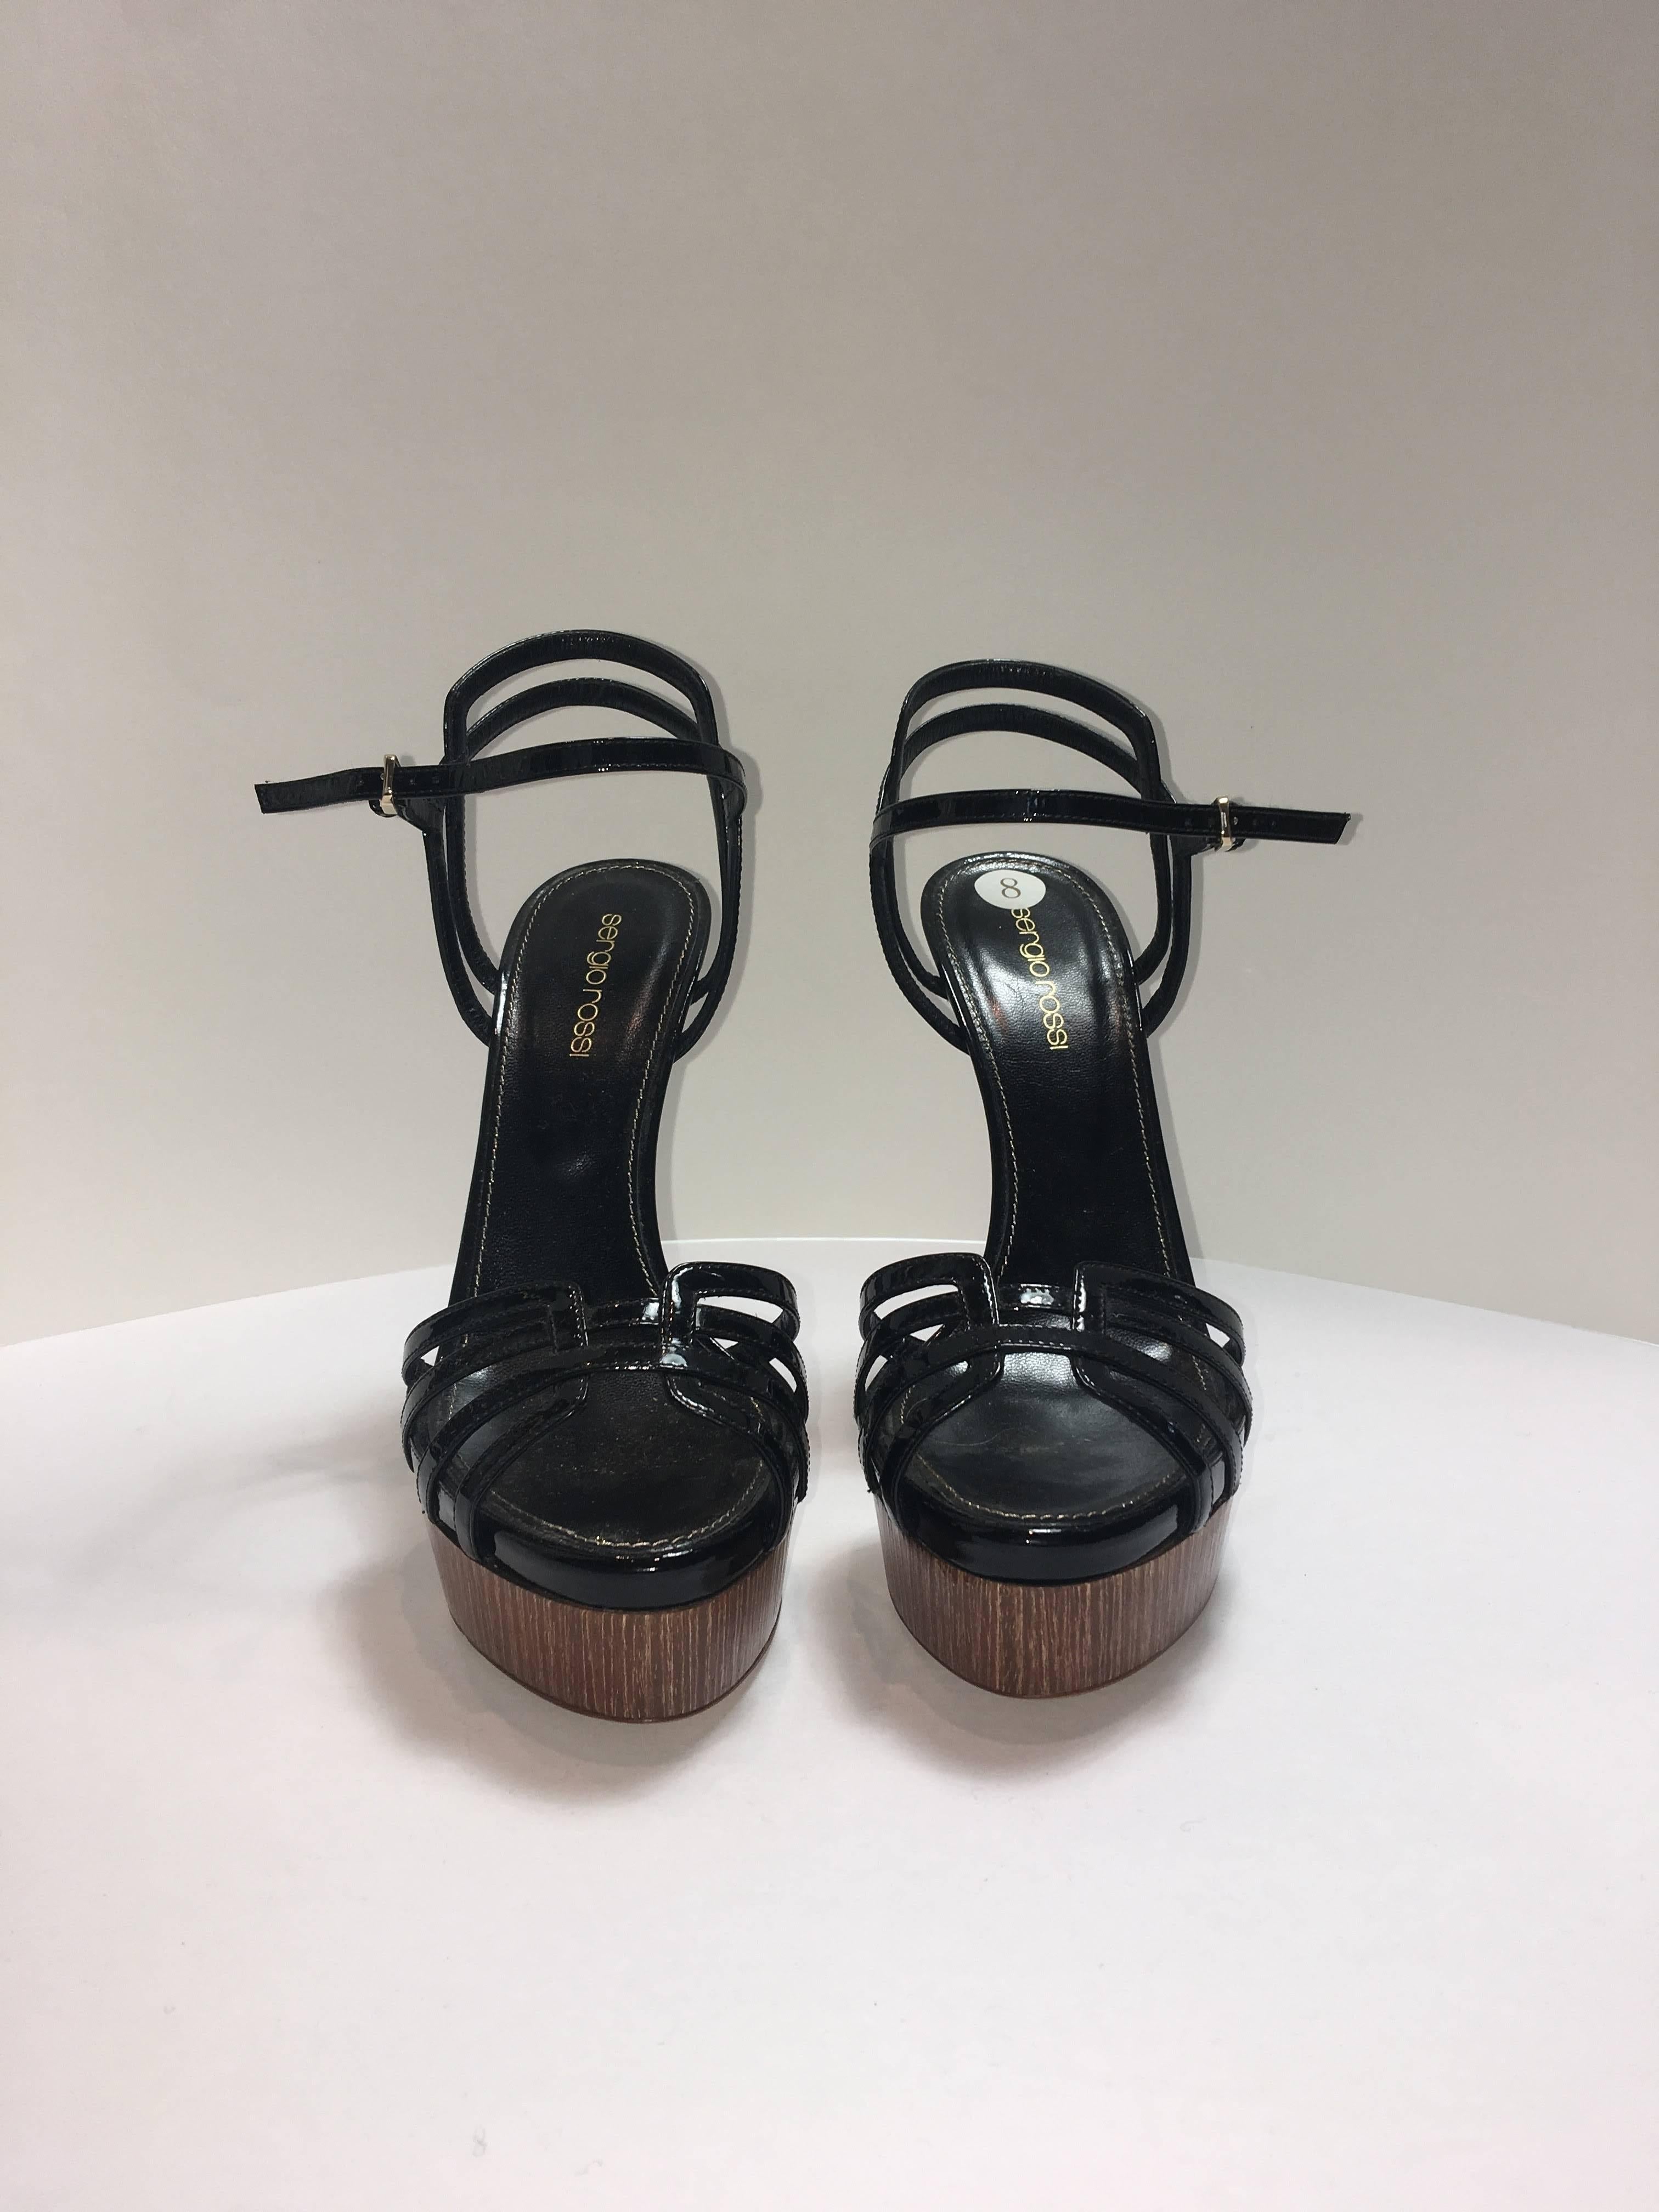 Sergio Rossi heels  in black Patent Leather. Sky high wood platforms in Size 38 with cut out detail.